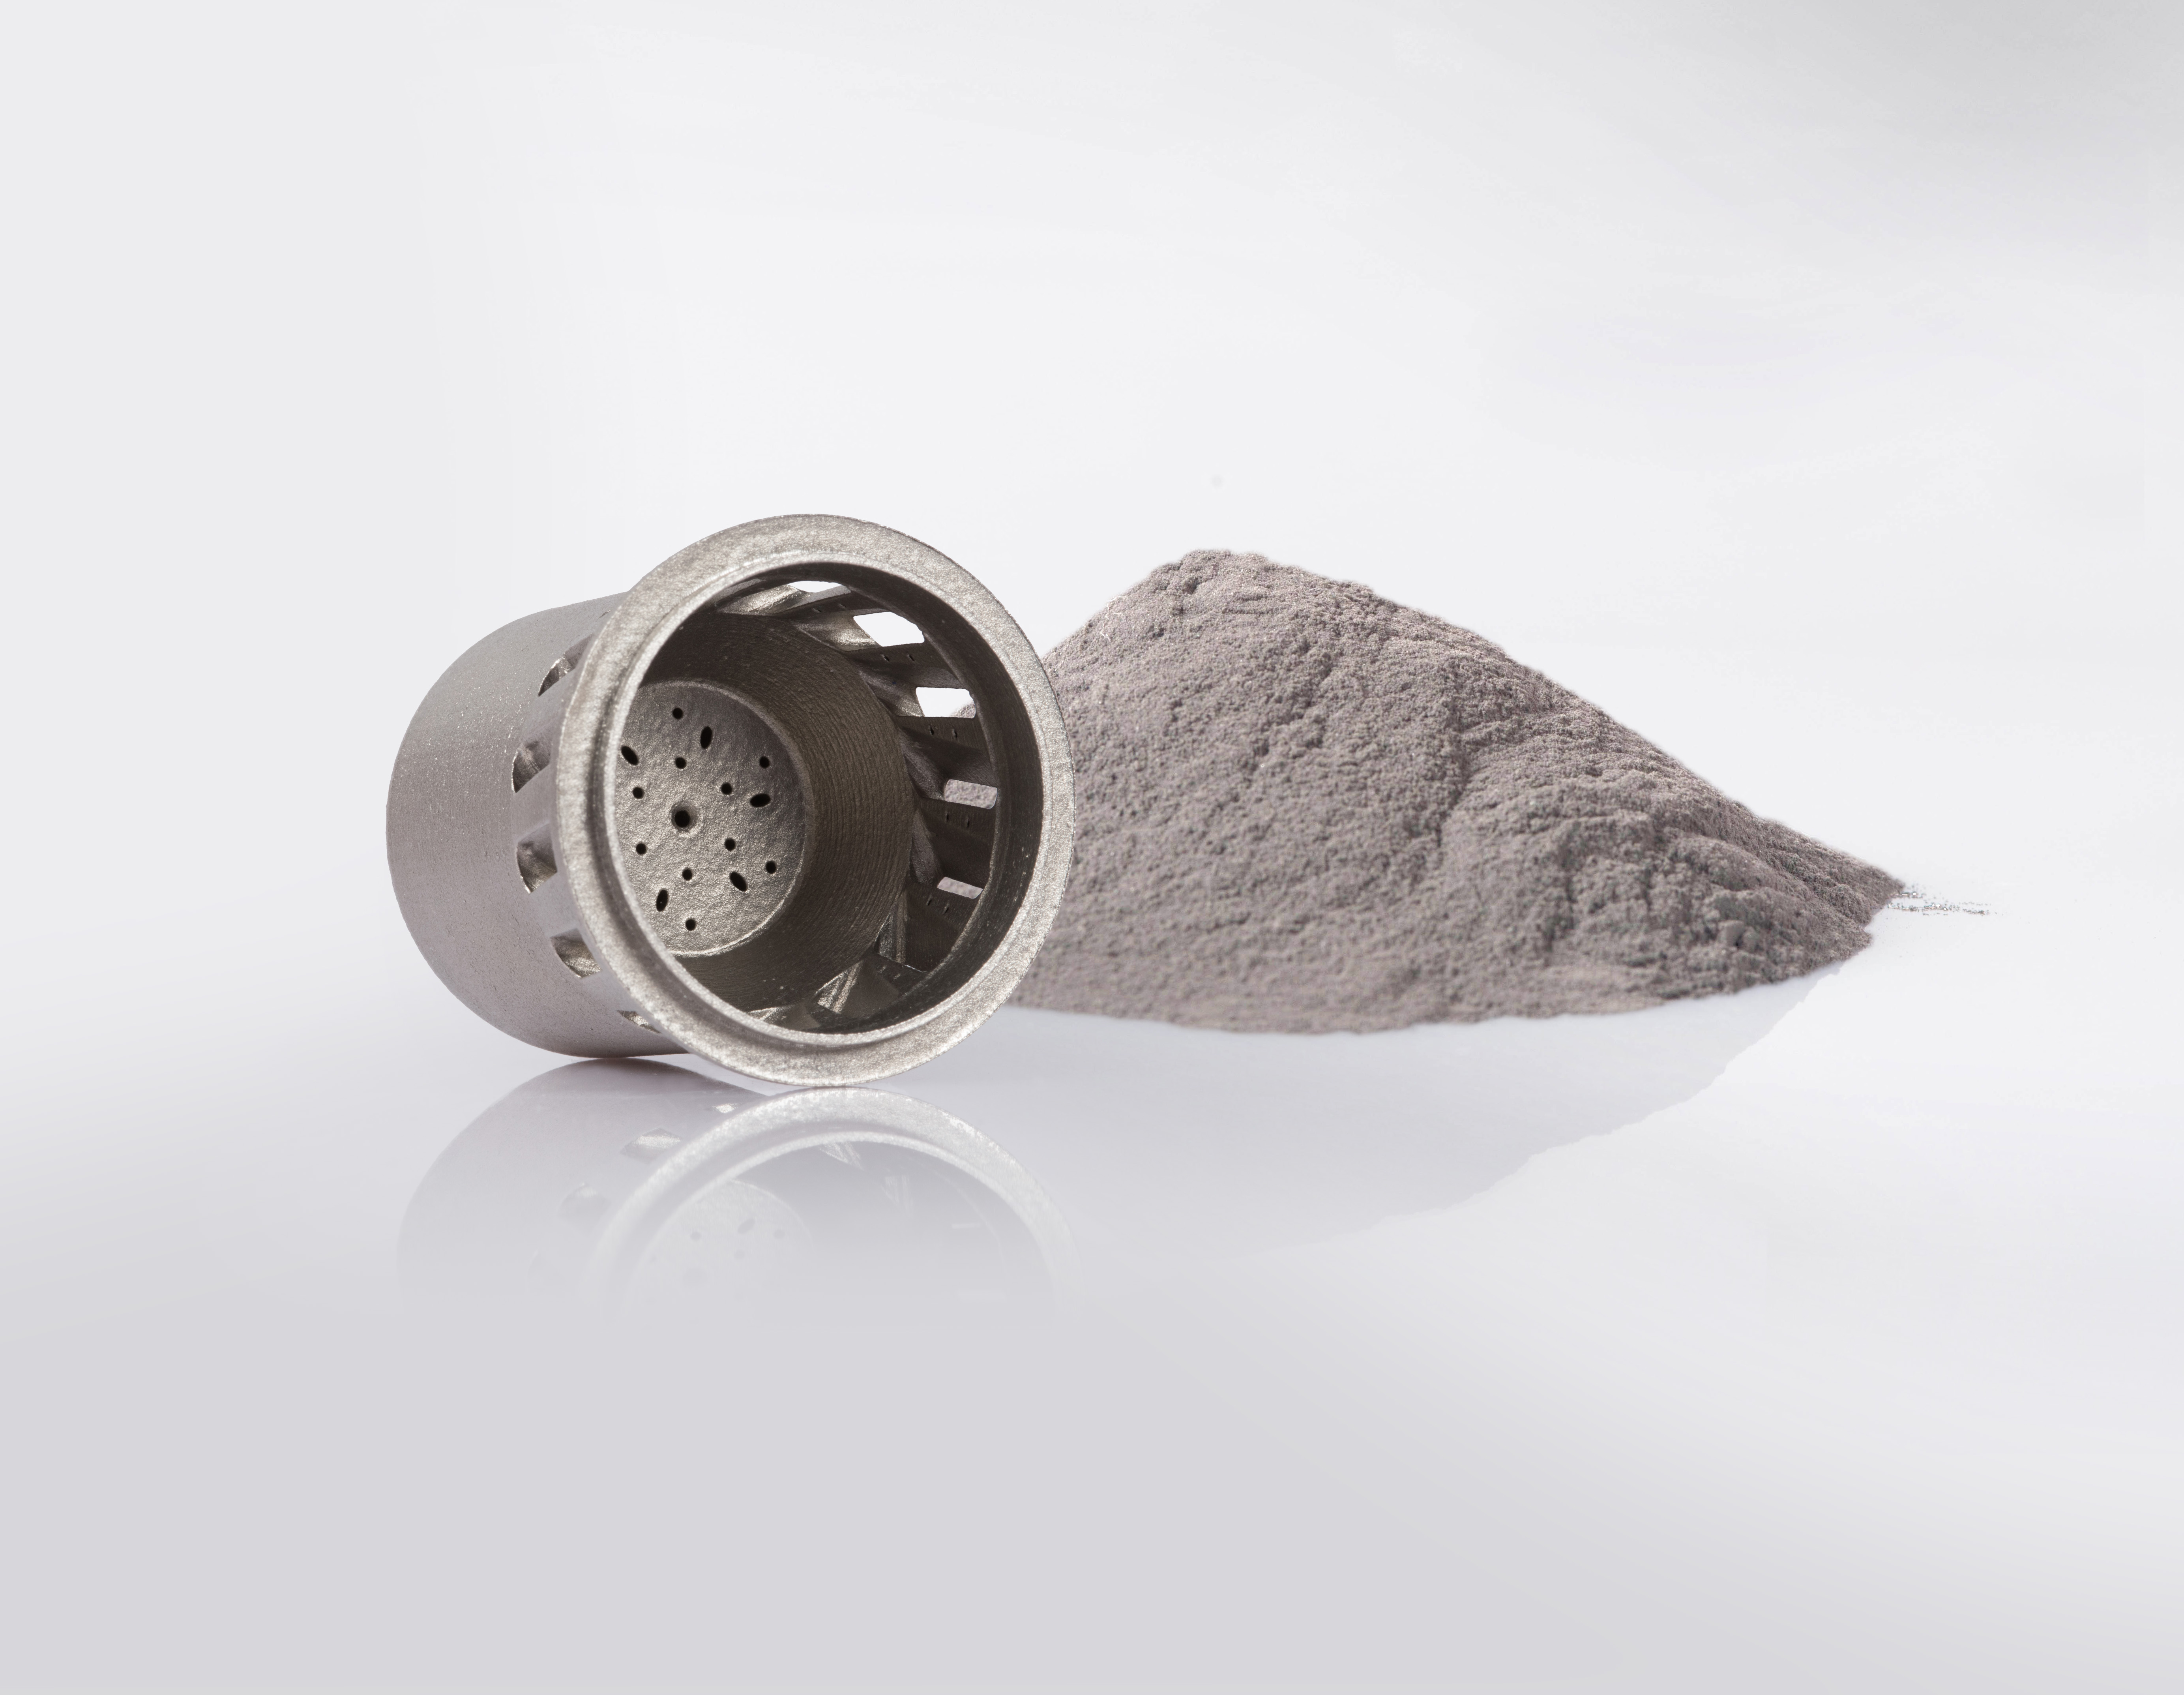 EOS has developed four new metal materials for additive manufacturing.